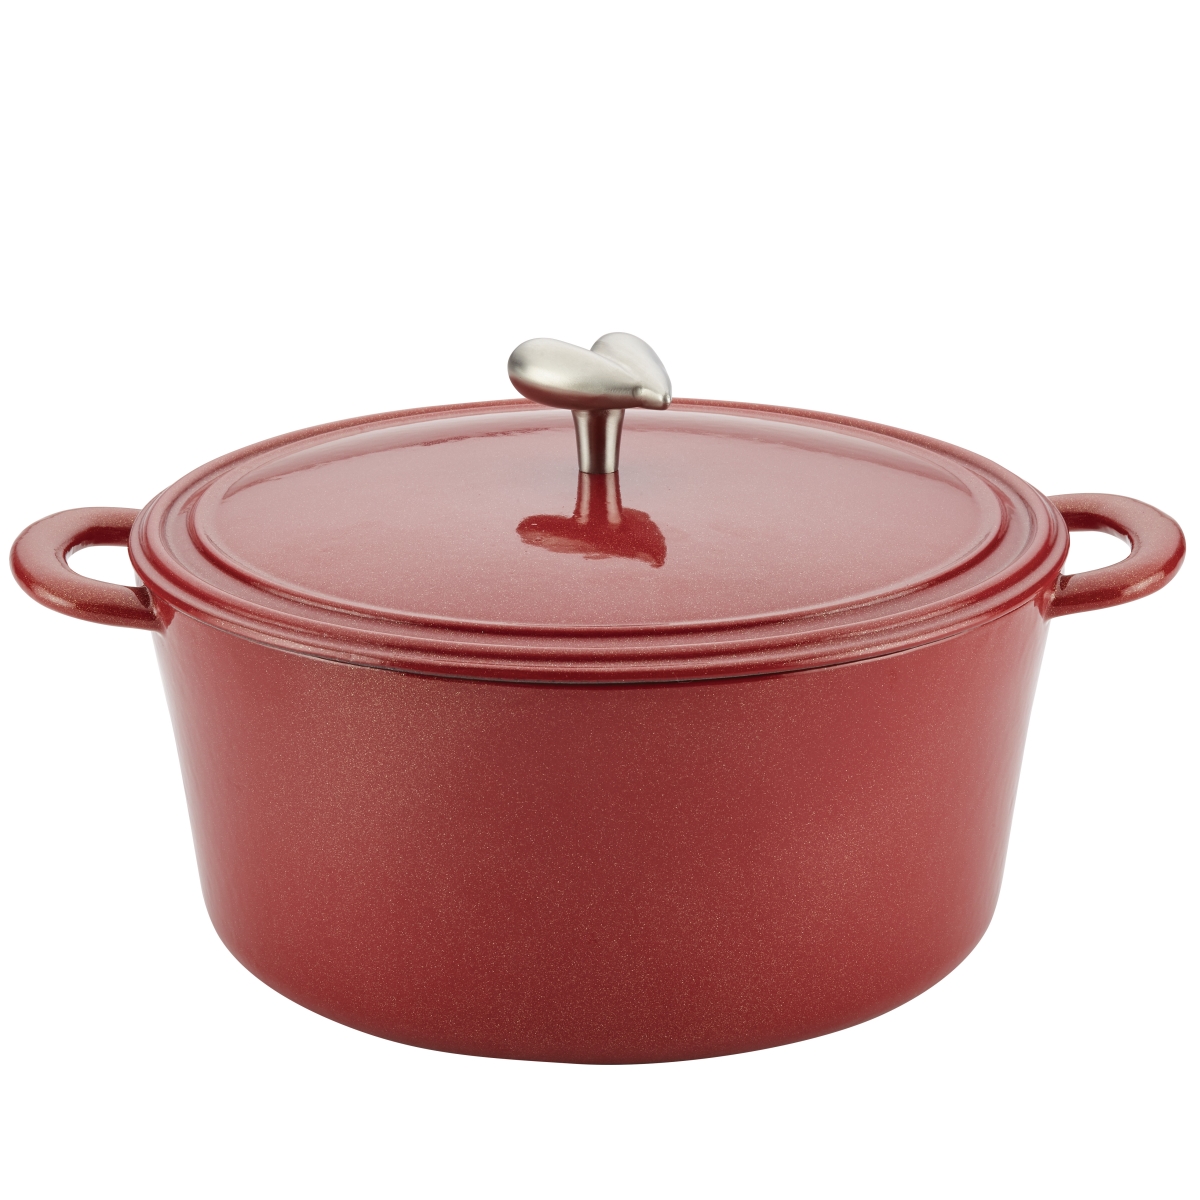 Picture of Ayesha Curry 47177 Cast Iron Enamel Covered Dutch Oven, 6 qt. - Sienna Red